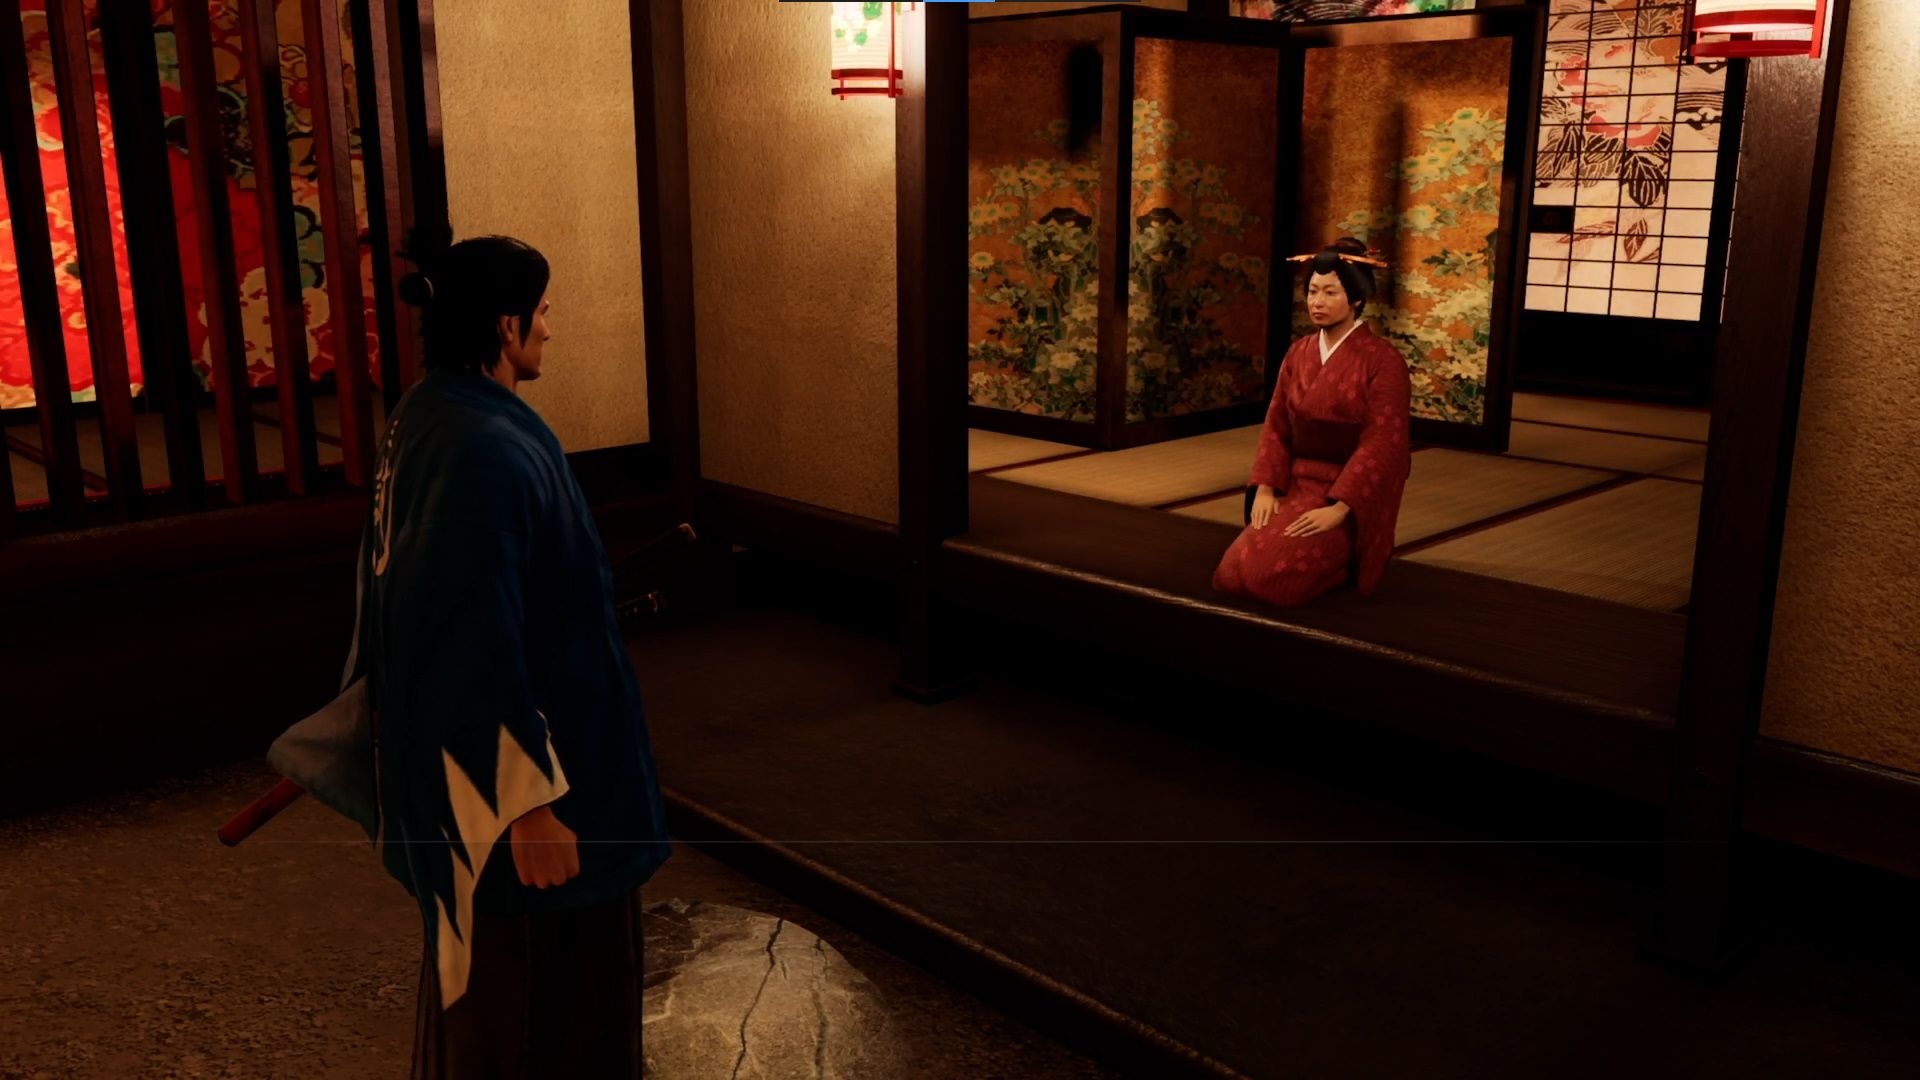 Like A Dragon Ishin, Ryoma paying a ryo at the inn to play minigames with Anna